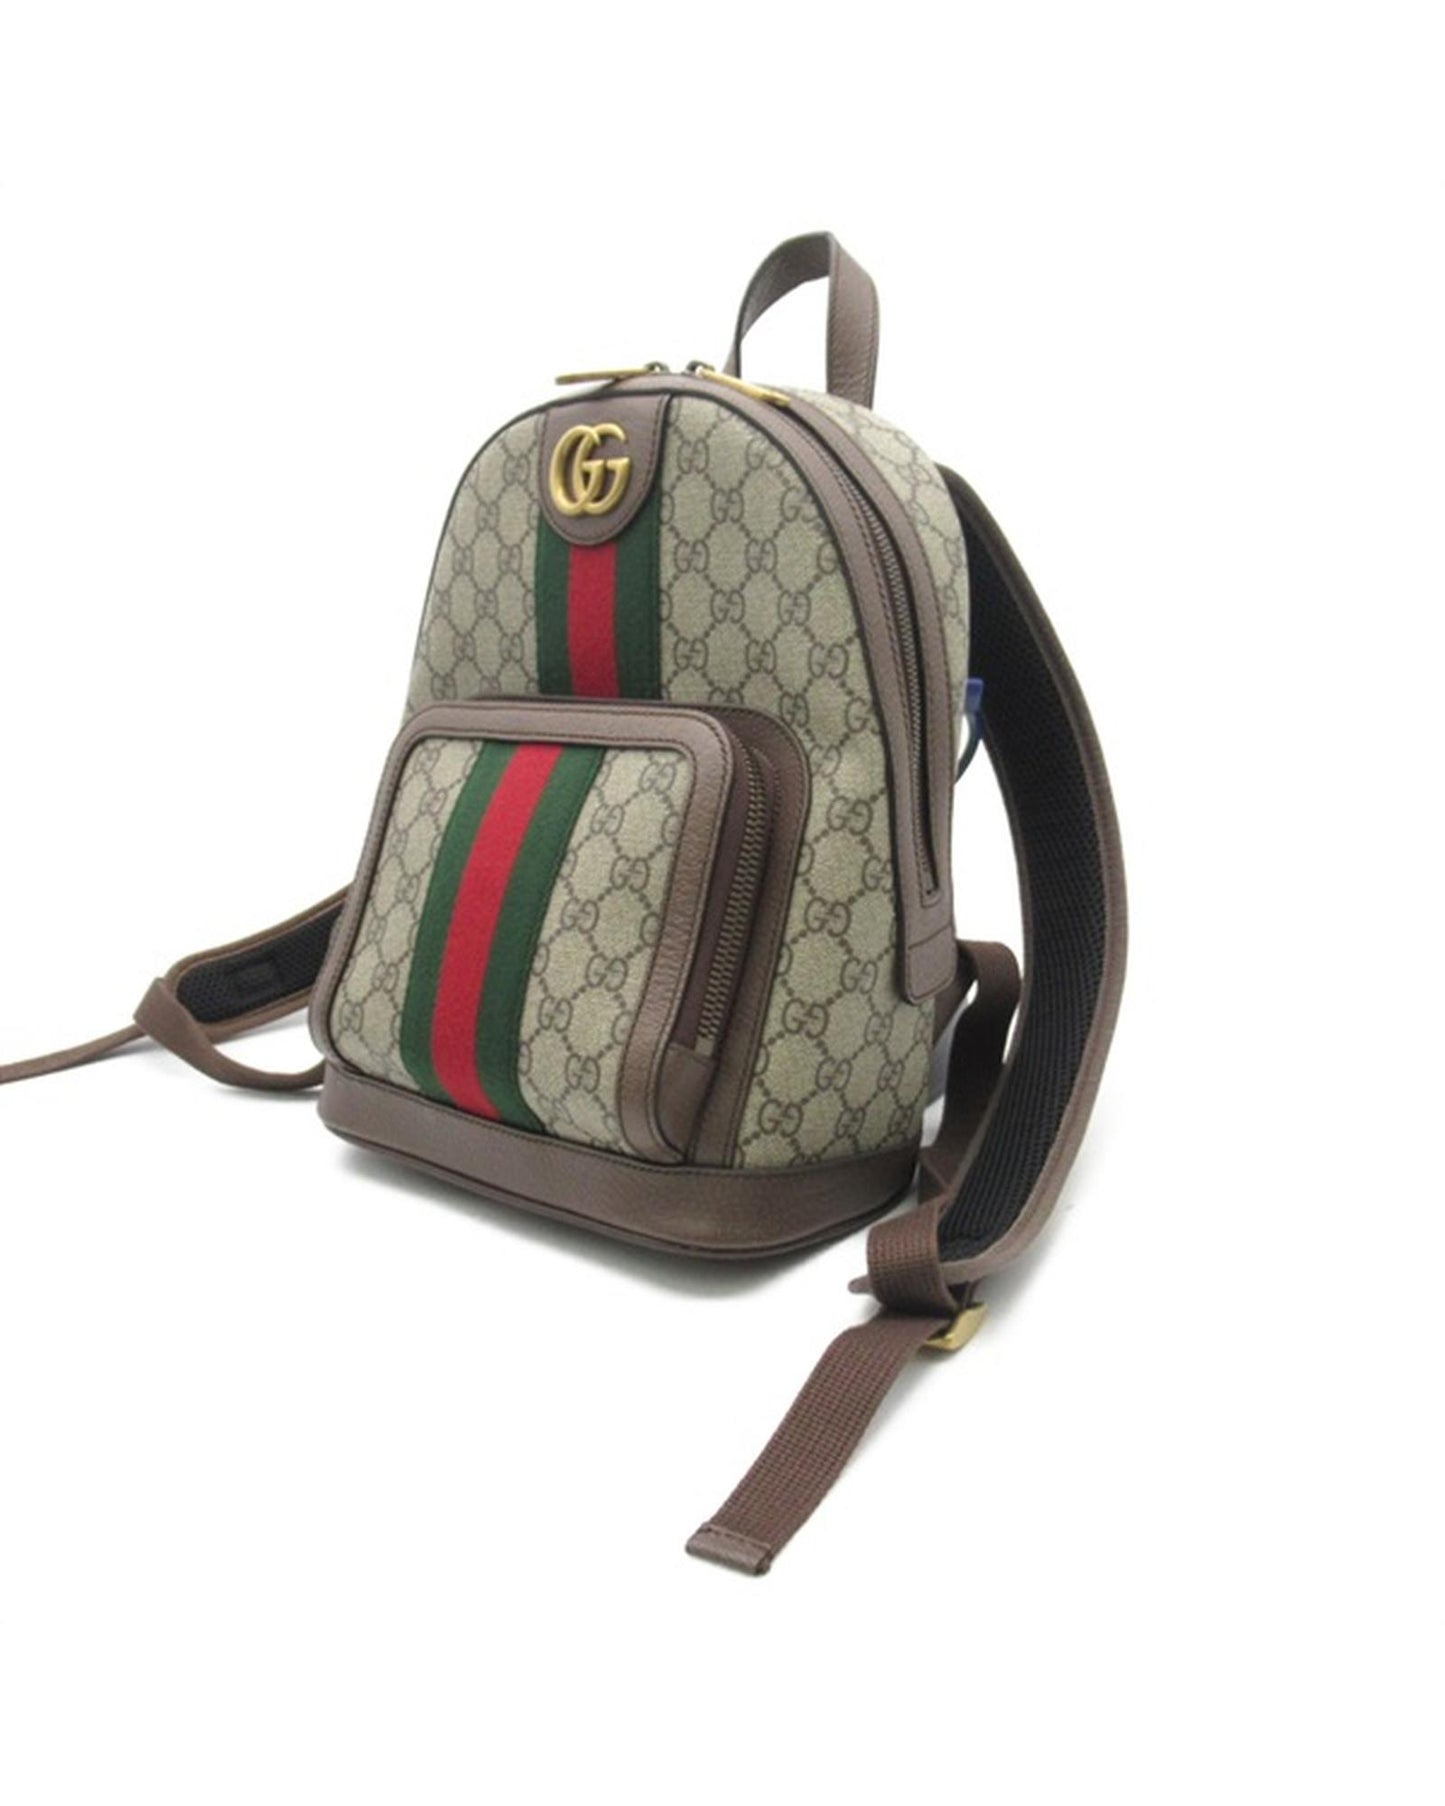 Gucci Women's GG Supreme Ophidia Backpack Bag in Brown in Brown